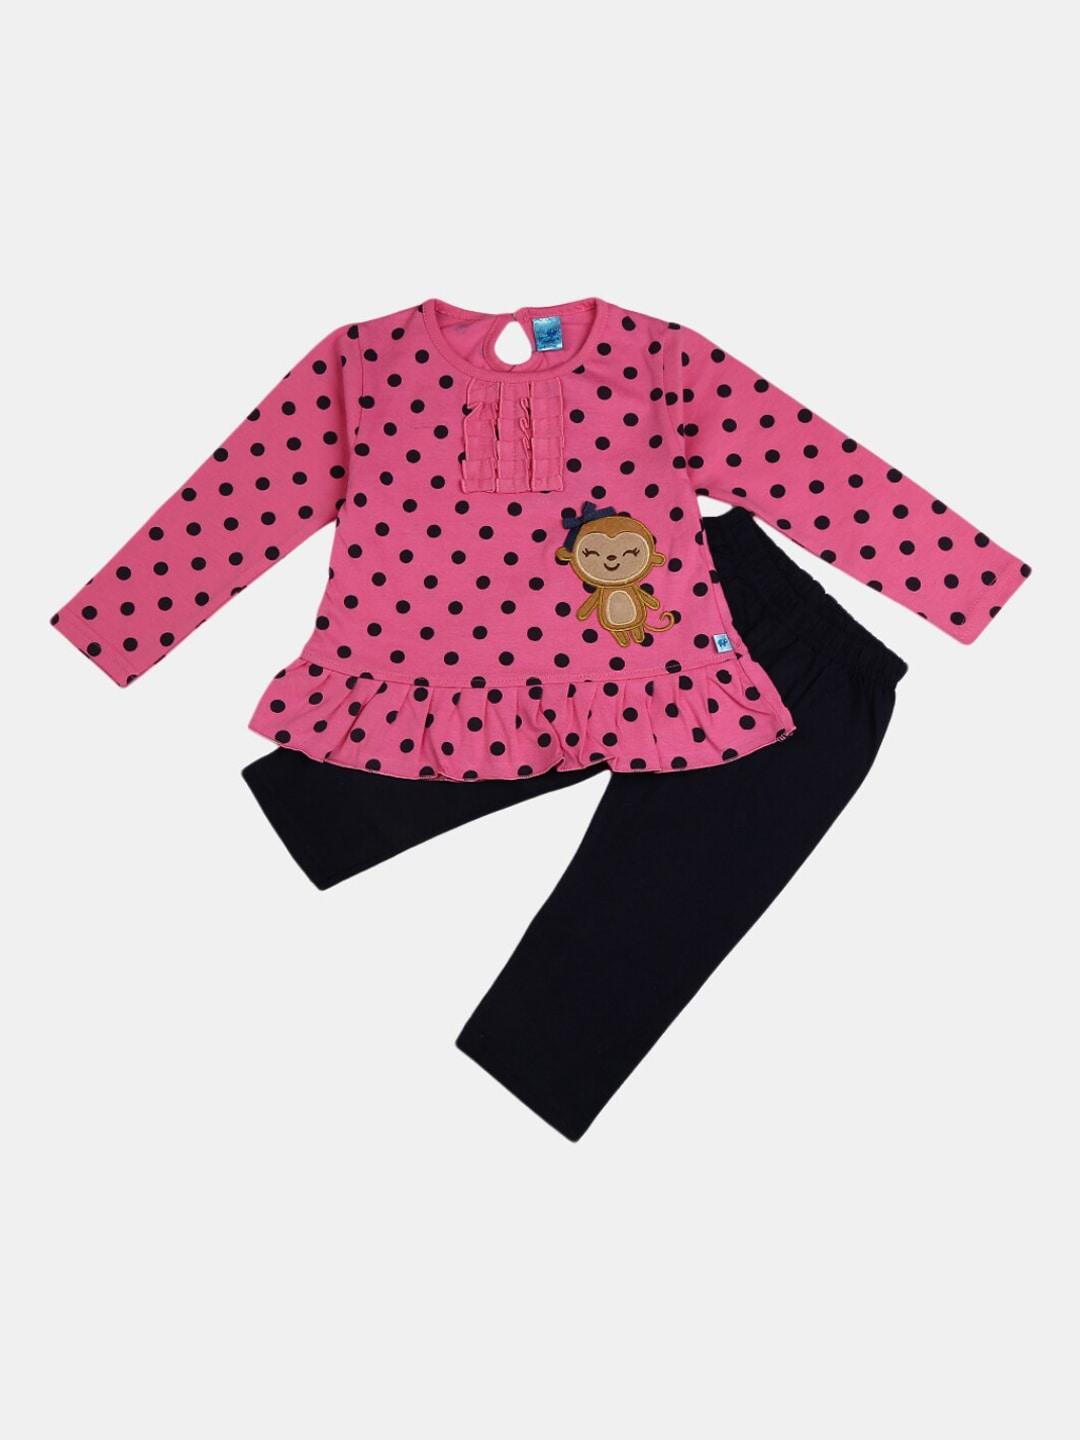 v-mart unisex kids pink & black printed top with trousers